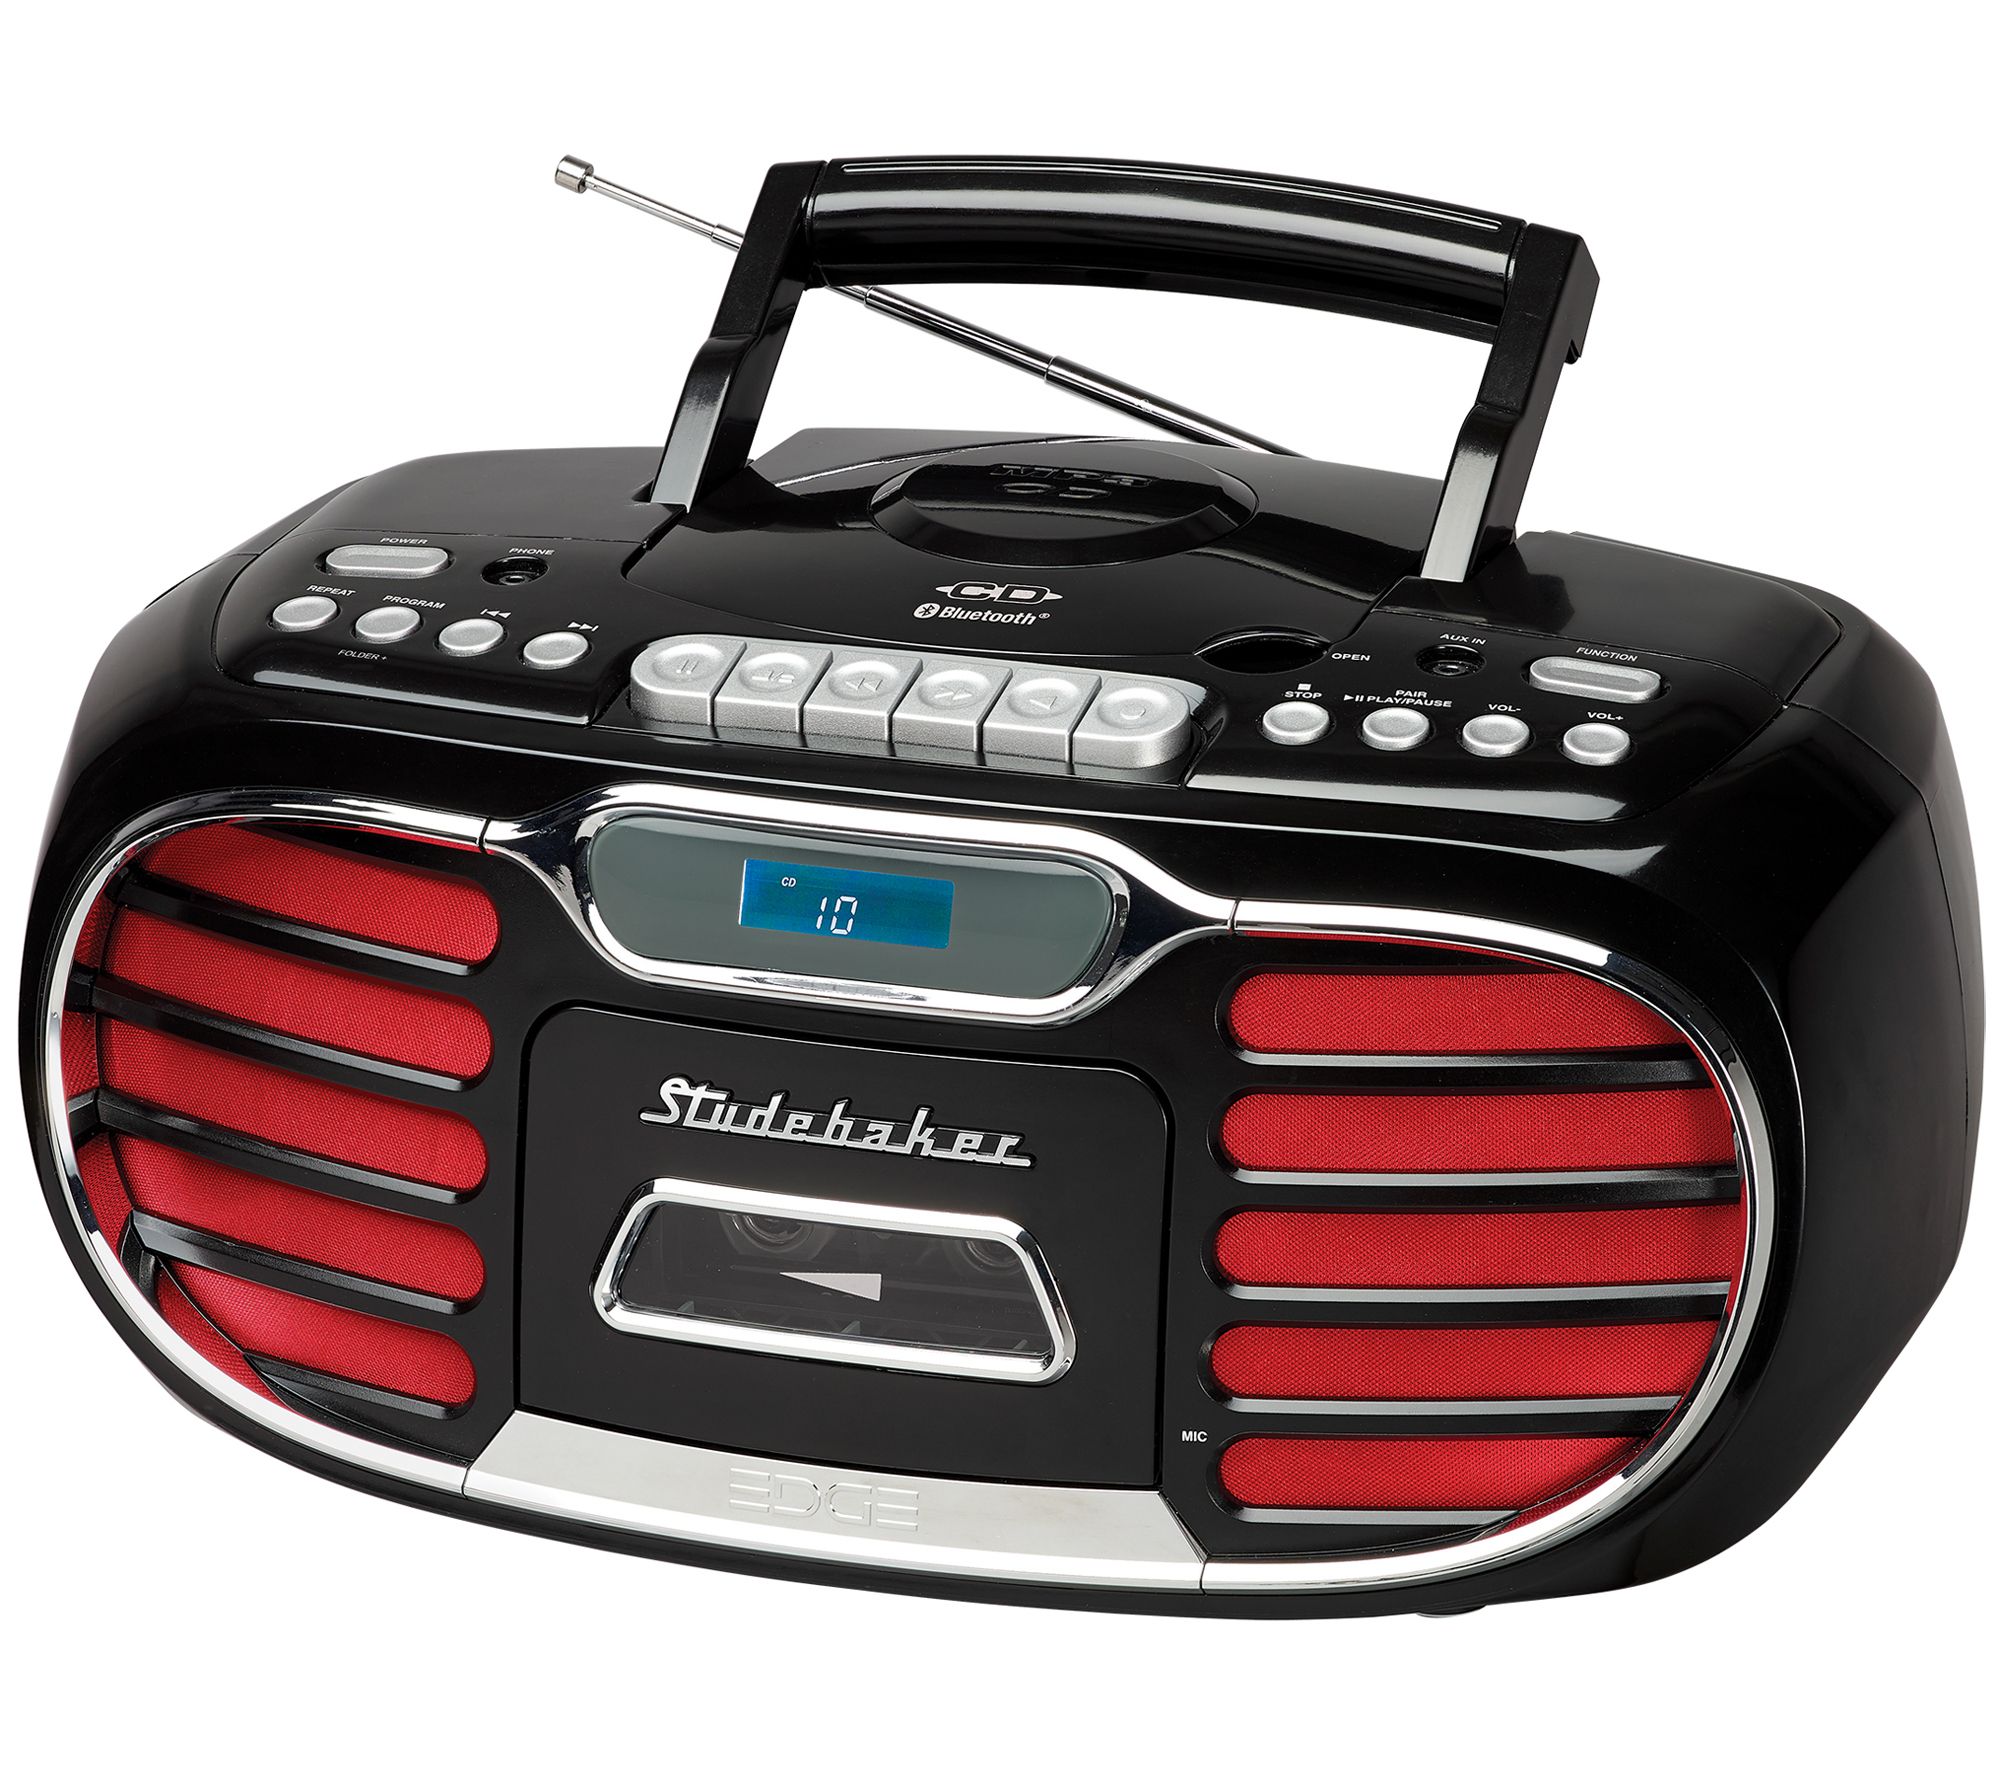 Studebaker Portable Cassette Recorder and Player with FM Radio Aux Input for External Devices 